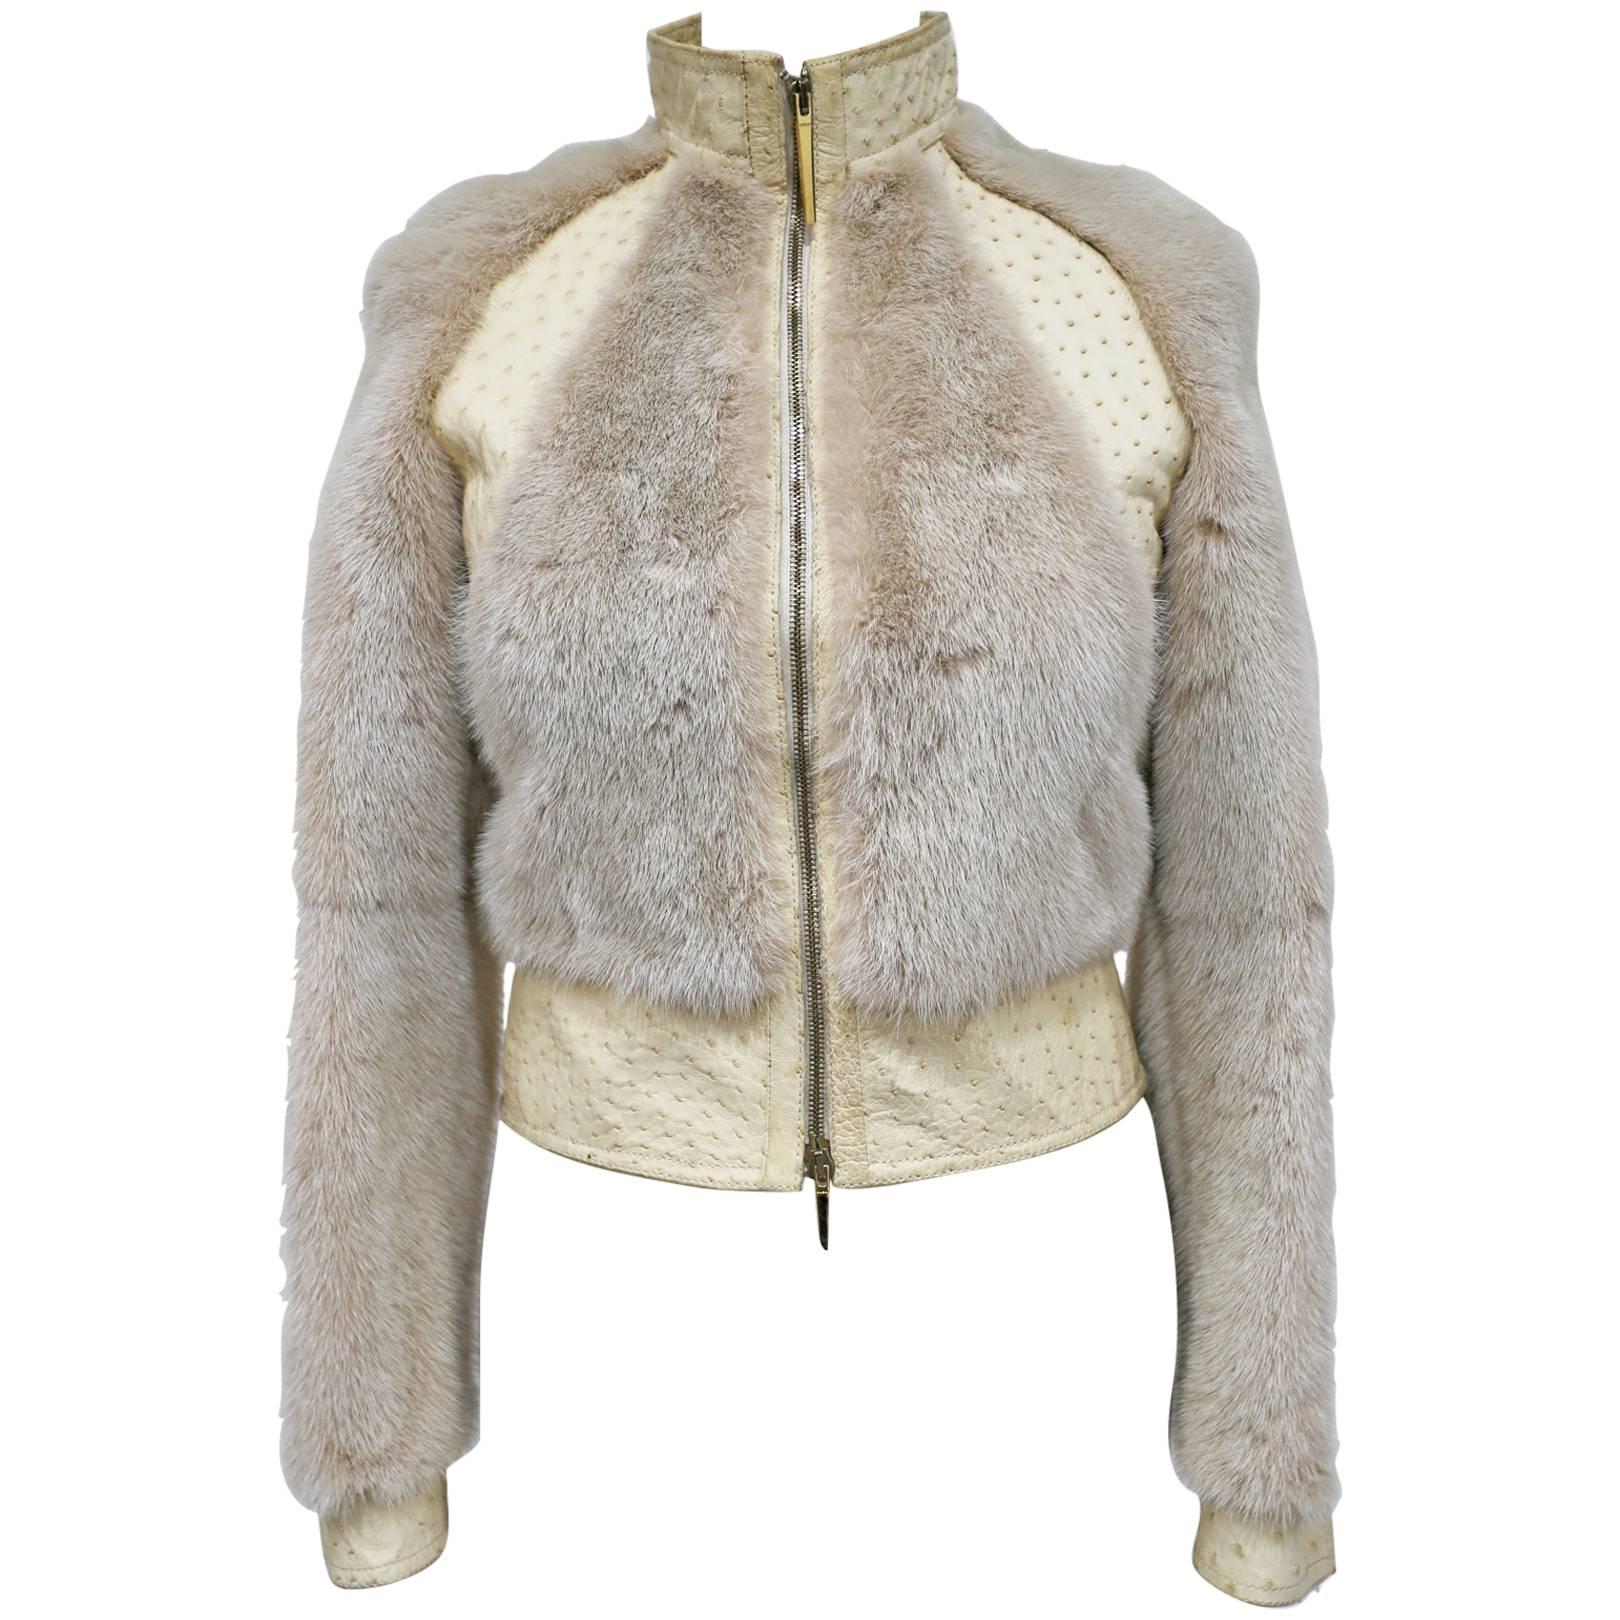 Gucci by Tom Ford Ostrich and Mink fur jacket, c. 2000